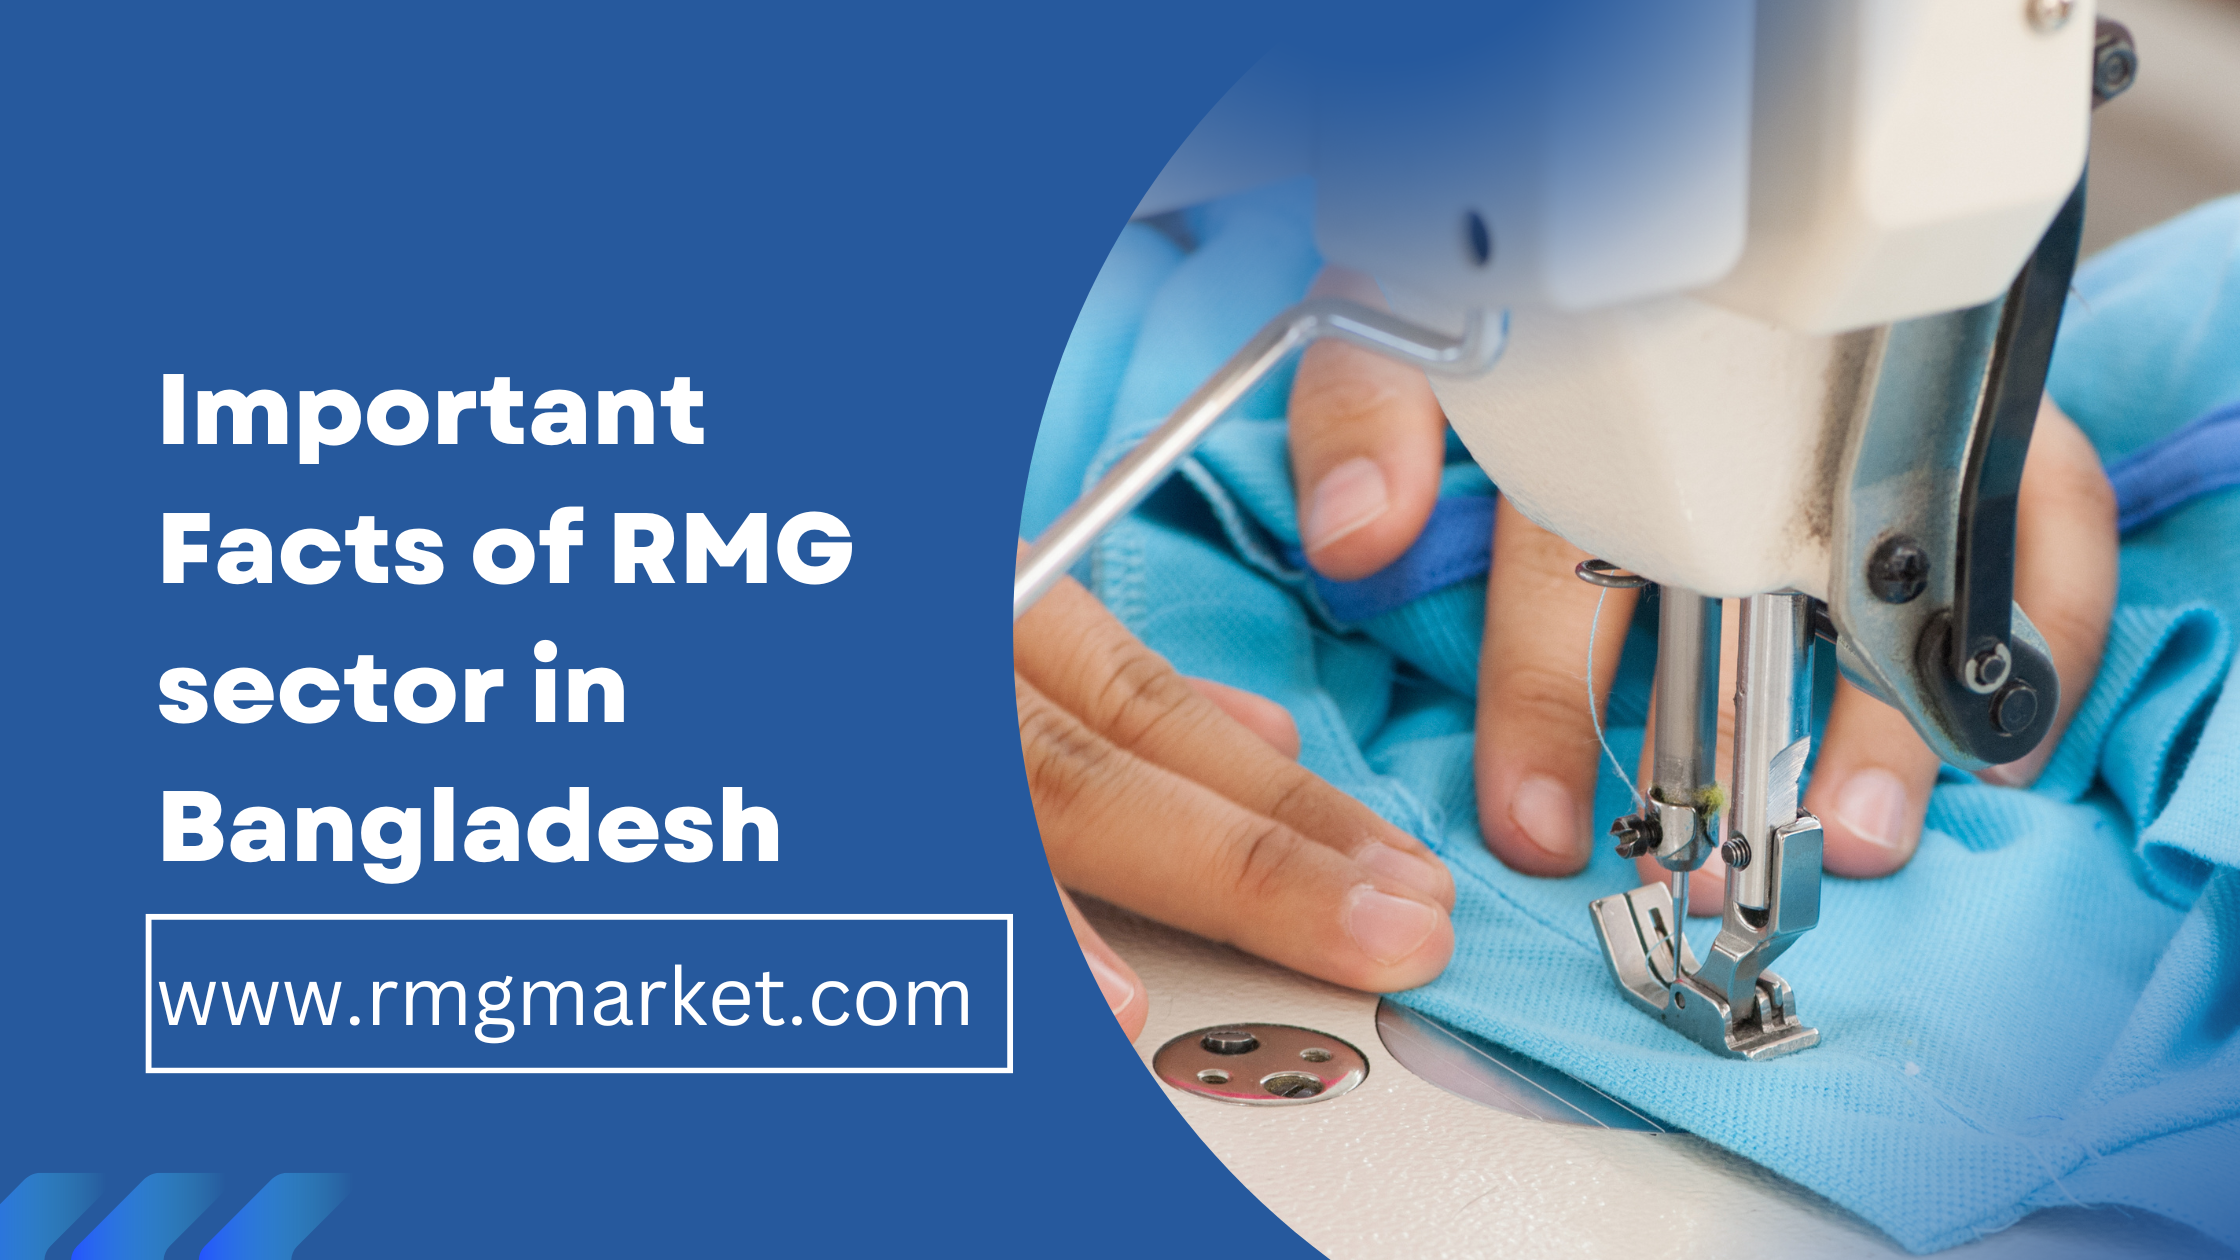 Important Facts of RMG sector of Bangladesh